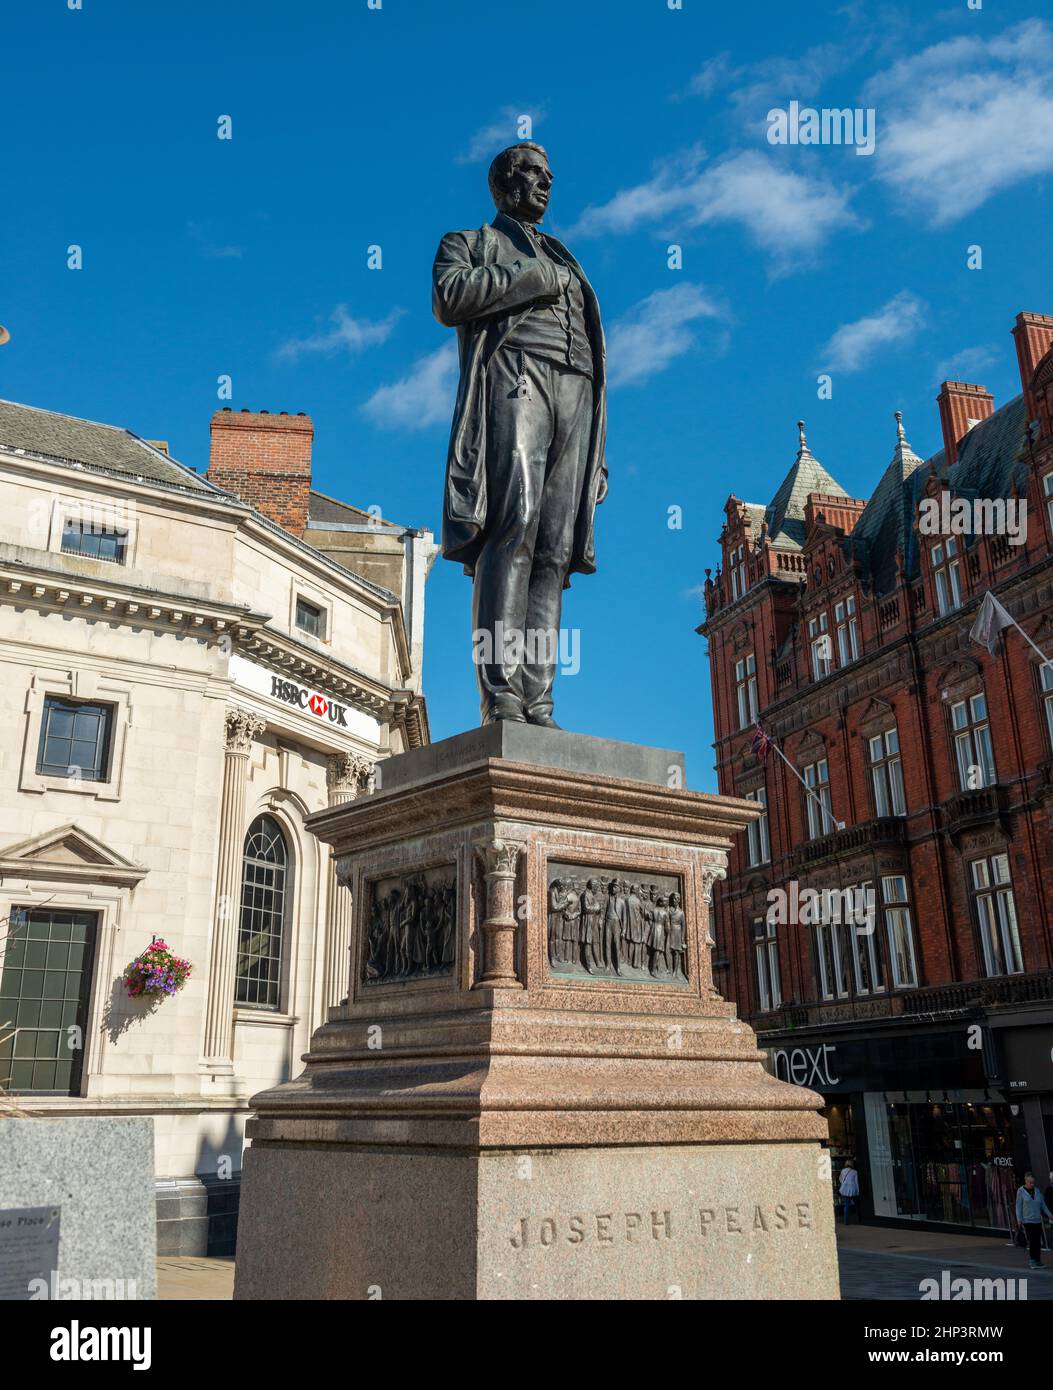 A bronze statue of Joseph Pease - quaker, parliamentarian, railway pioneer and animal rights activist -  in the centre of Darlington Stock Photo